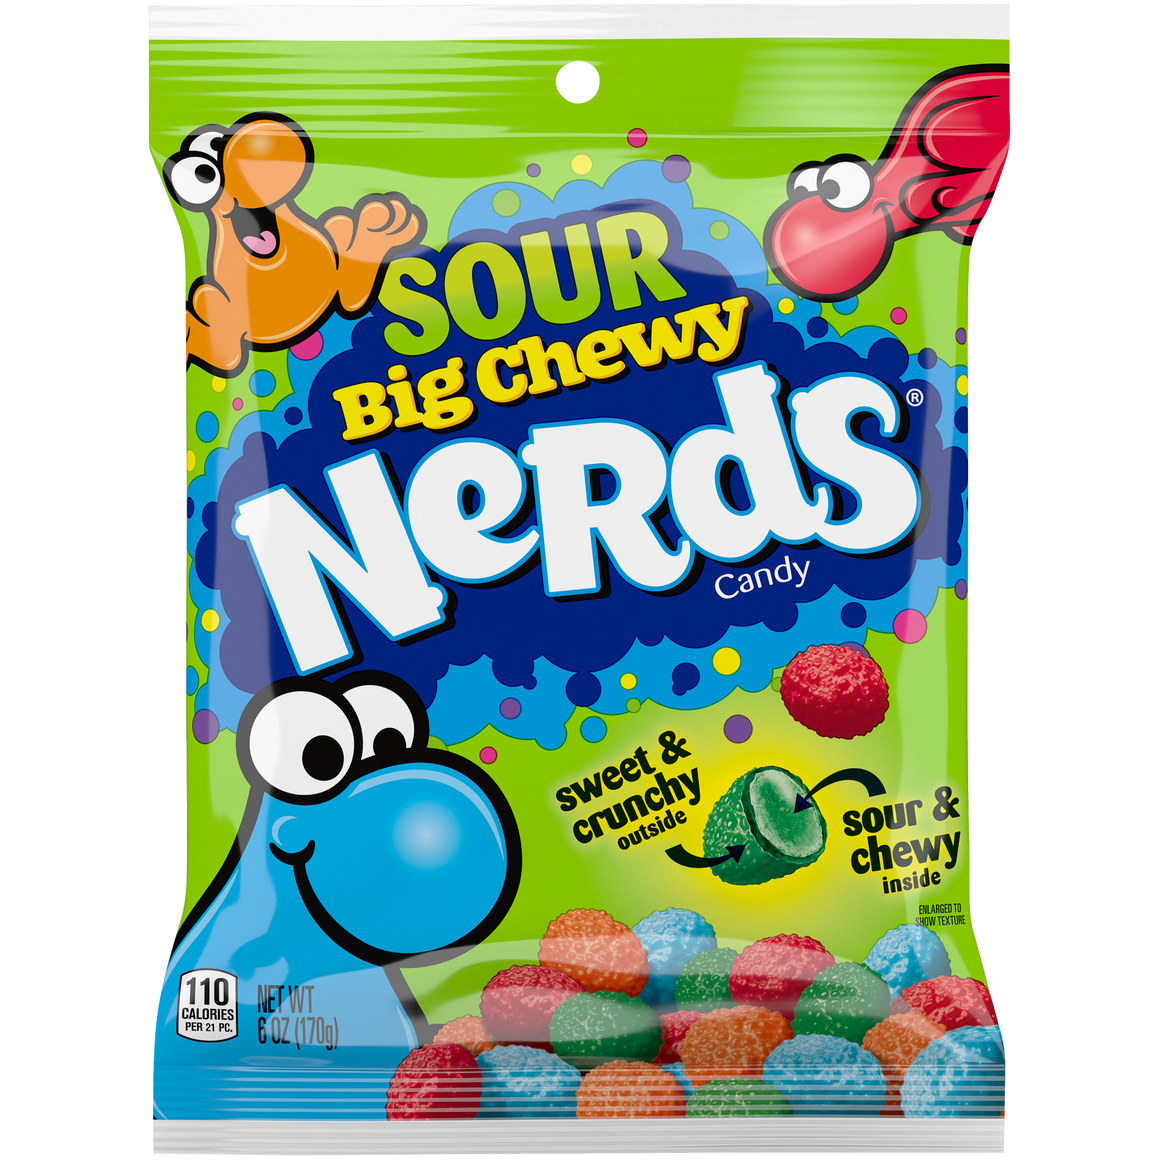 All City Candy Sour Big Chewy Nerds Candy - 6-oz. Bag Chewy Ferrara Candy Company For fresh candy and great service, visit www.allcitycandy.com